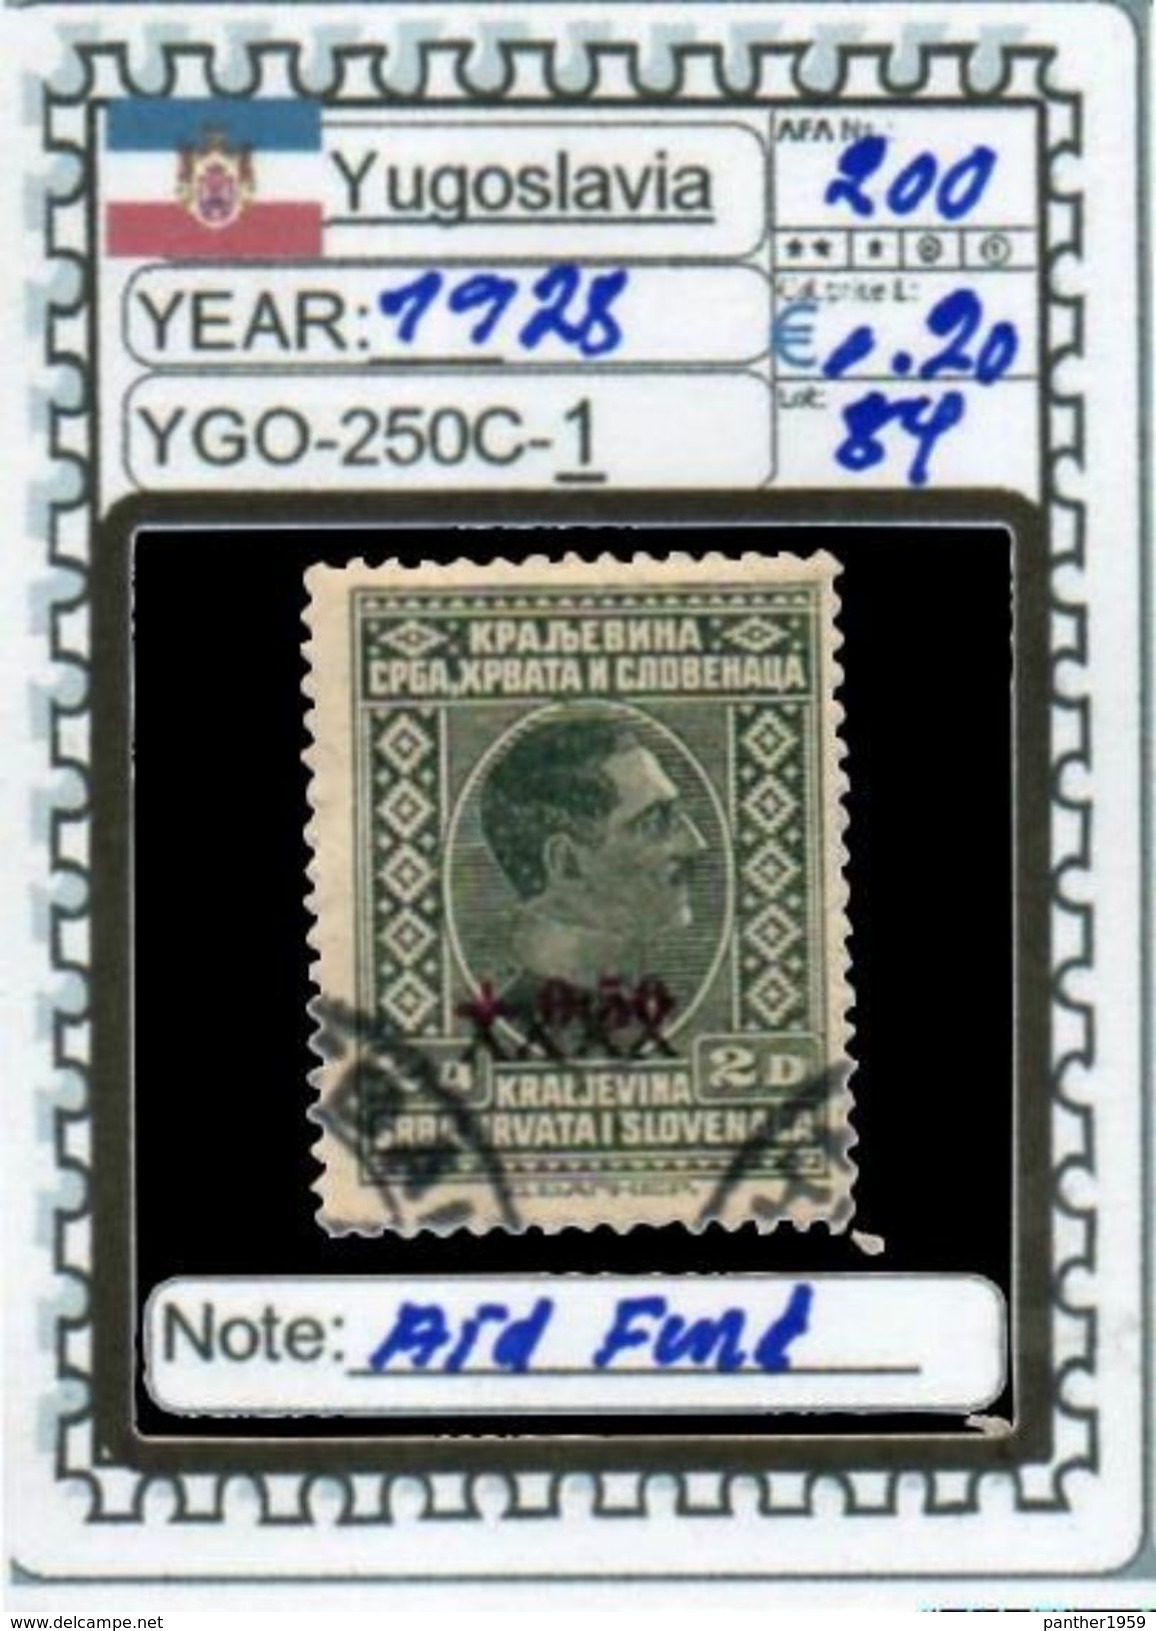 EUROPE:#YUGOSLAVIA#CLASSIC# MH*# (YGO-250C-1) (84) - Used Stamps